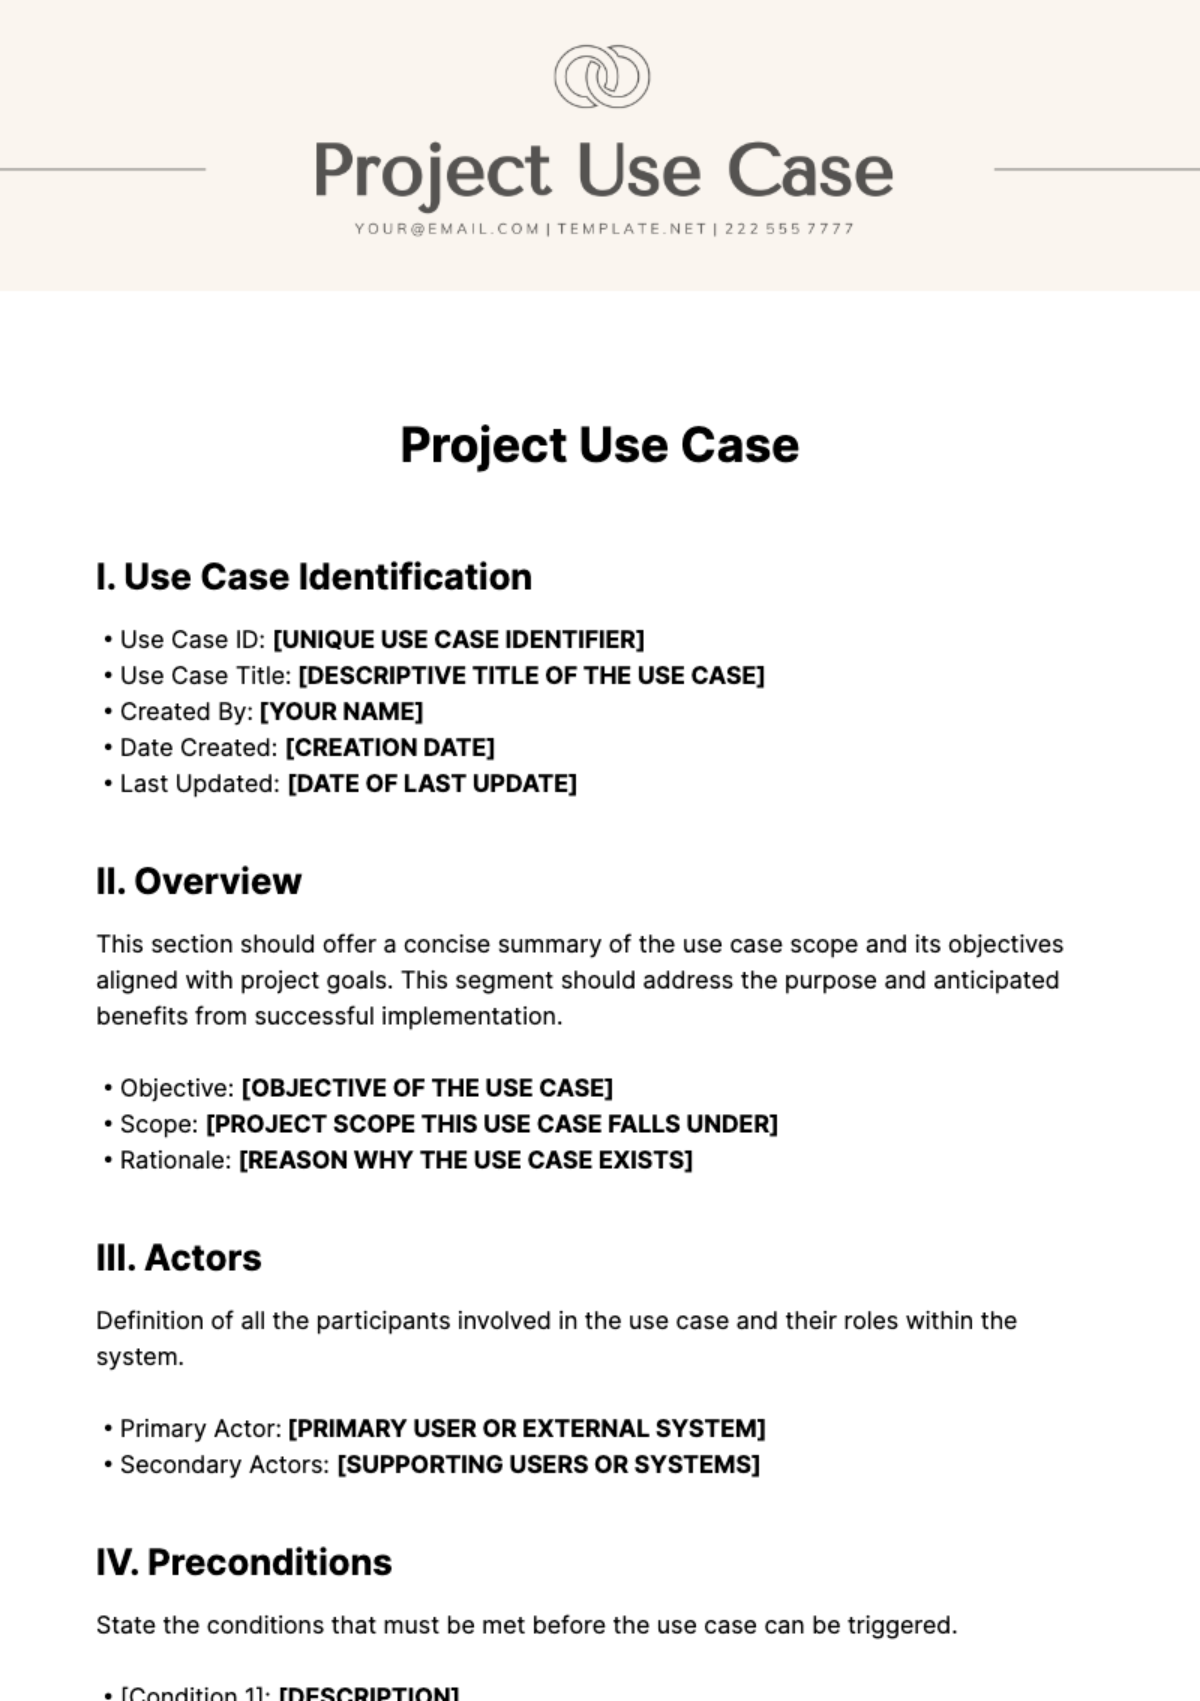 Free Project Use Case Template